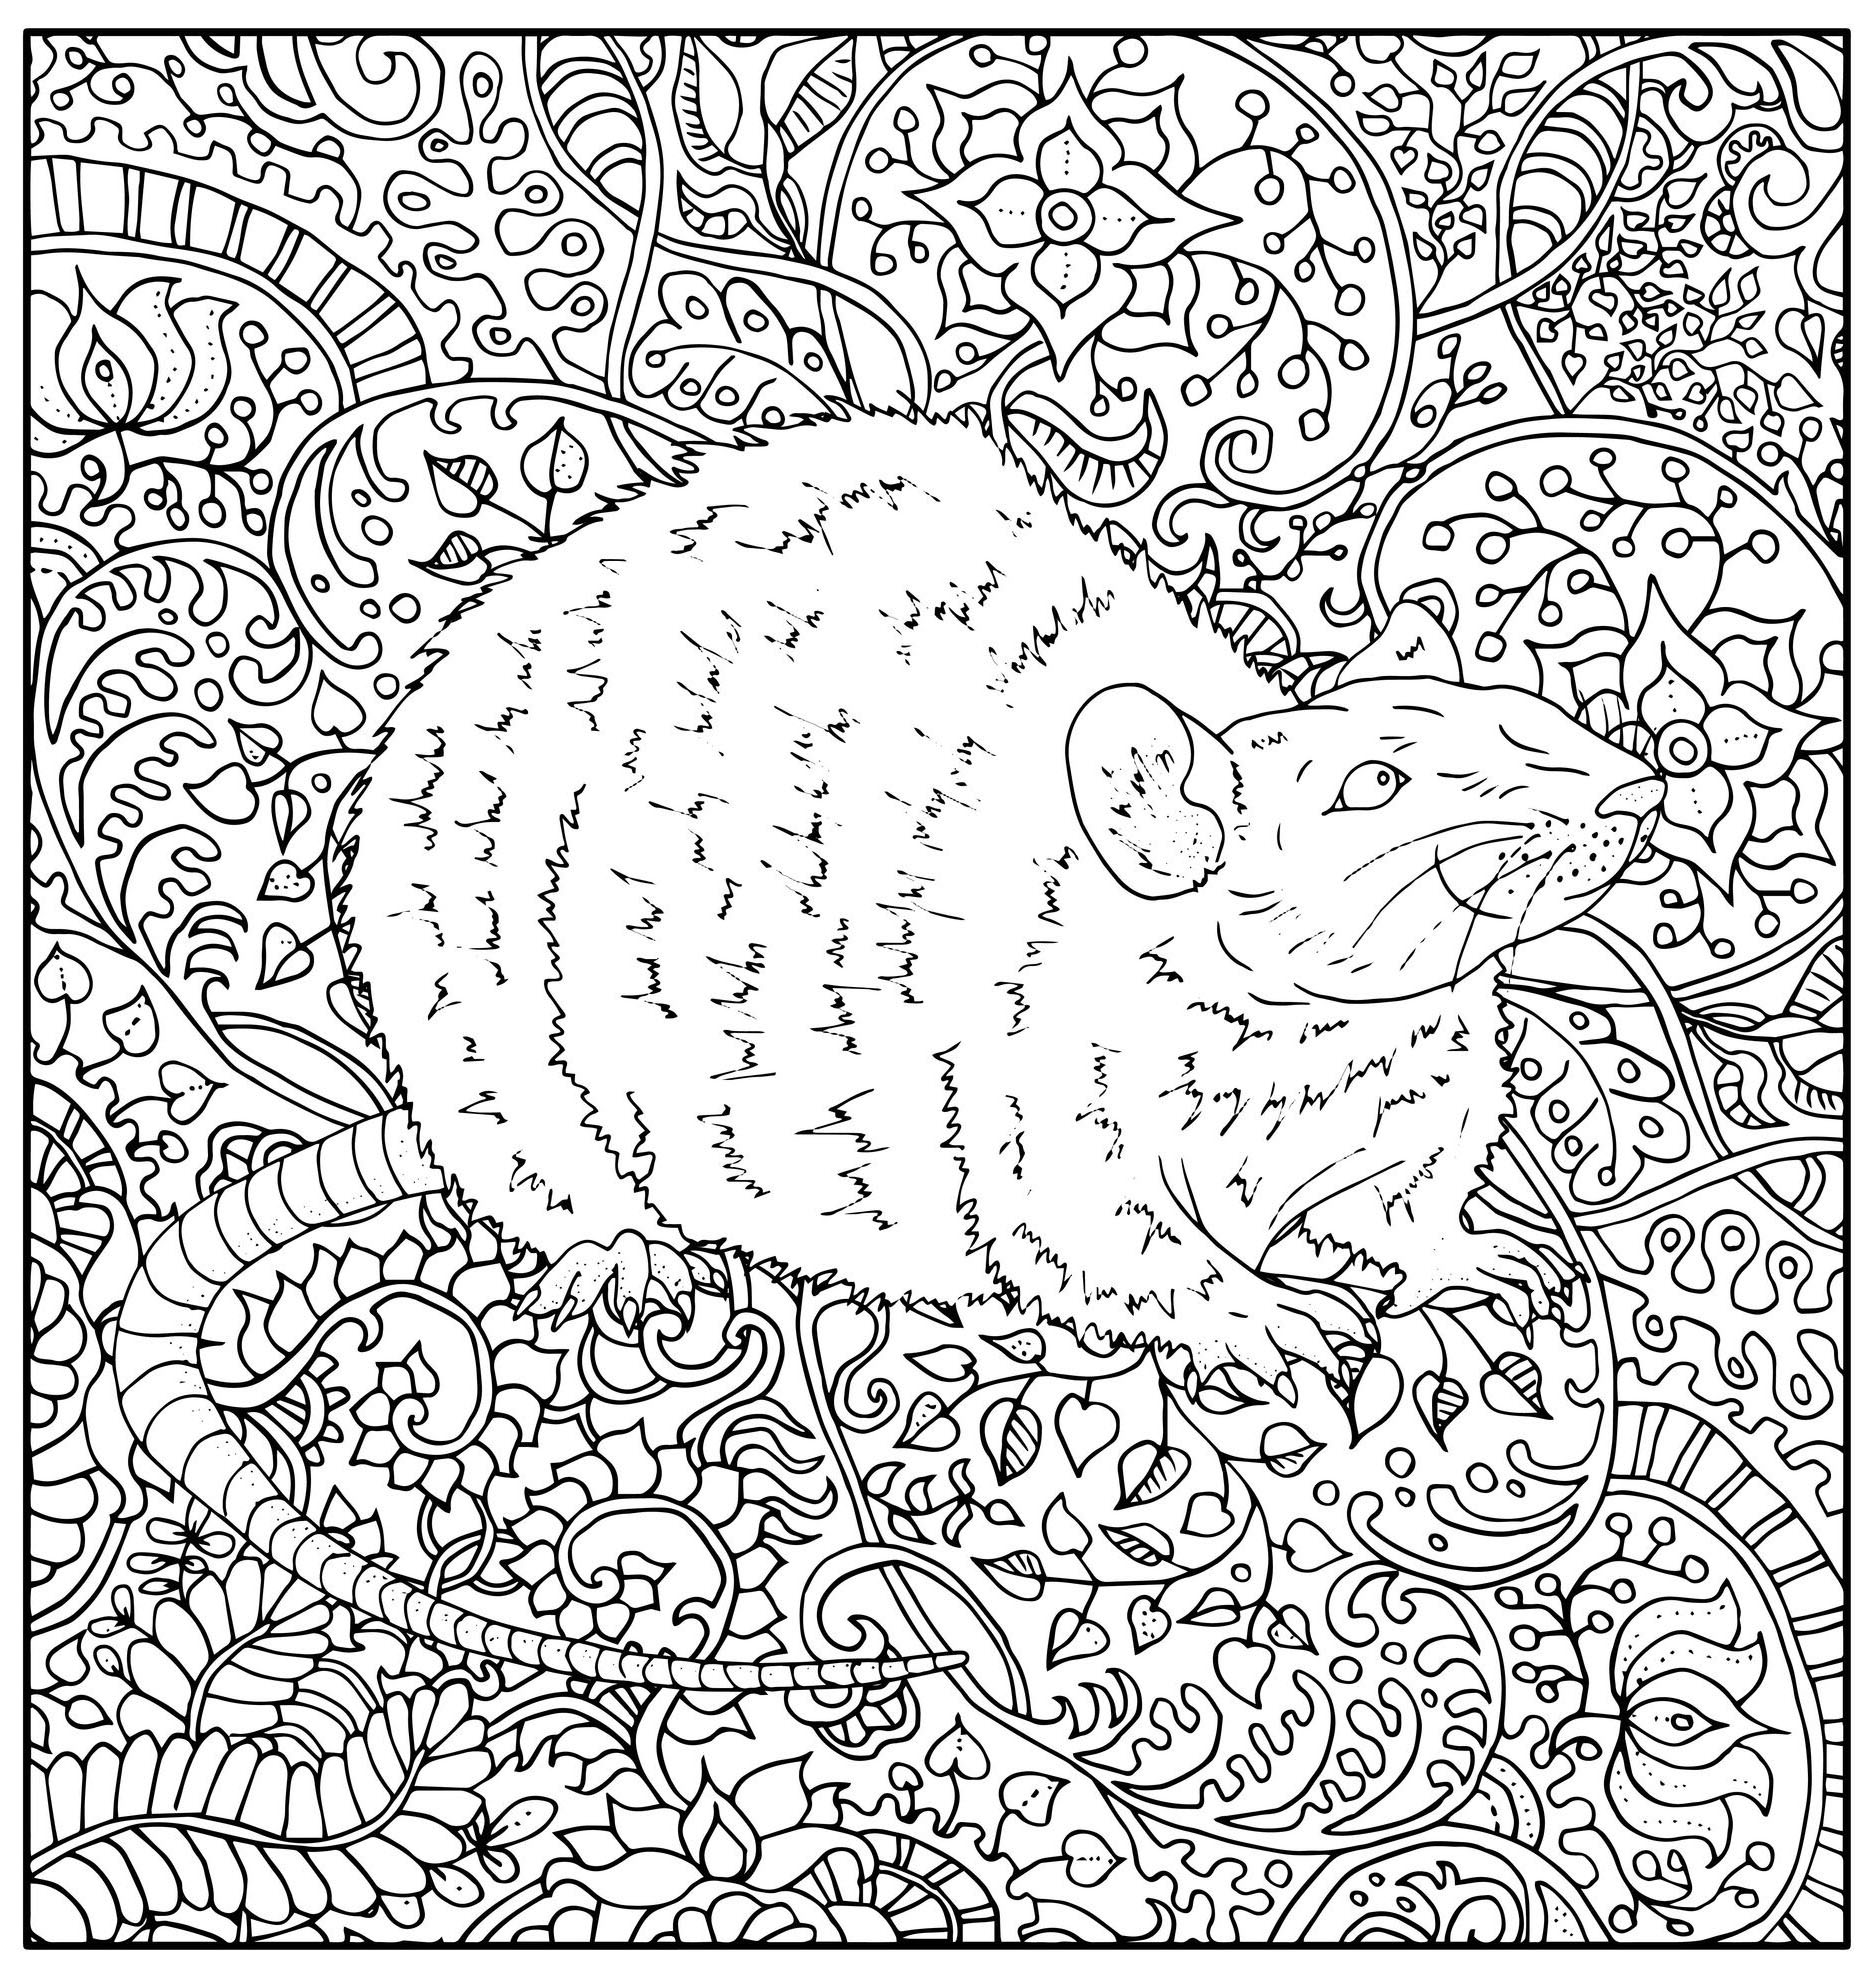 Coloring page representing a realistically drawn rat with various abstract vegetal patterns, Source : 123rf   Artist : Vera Petruk